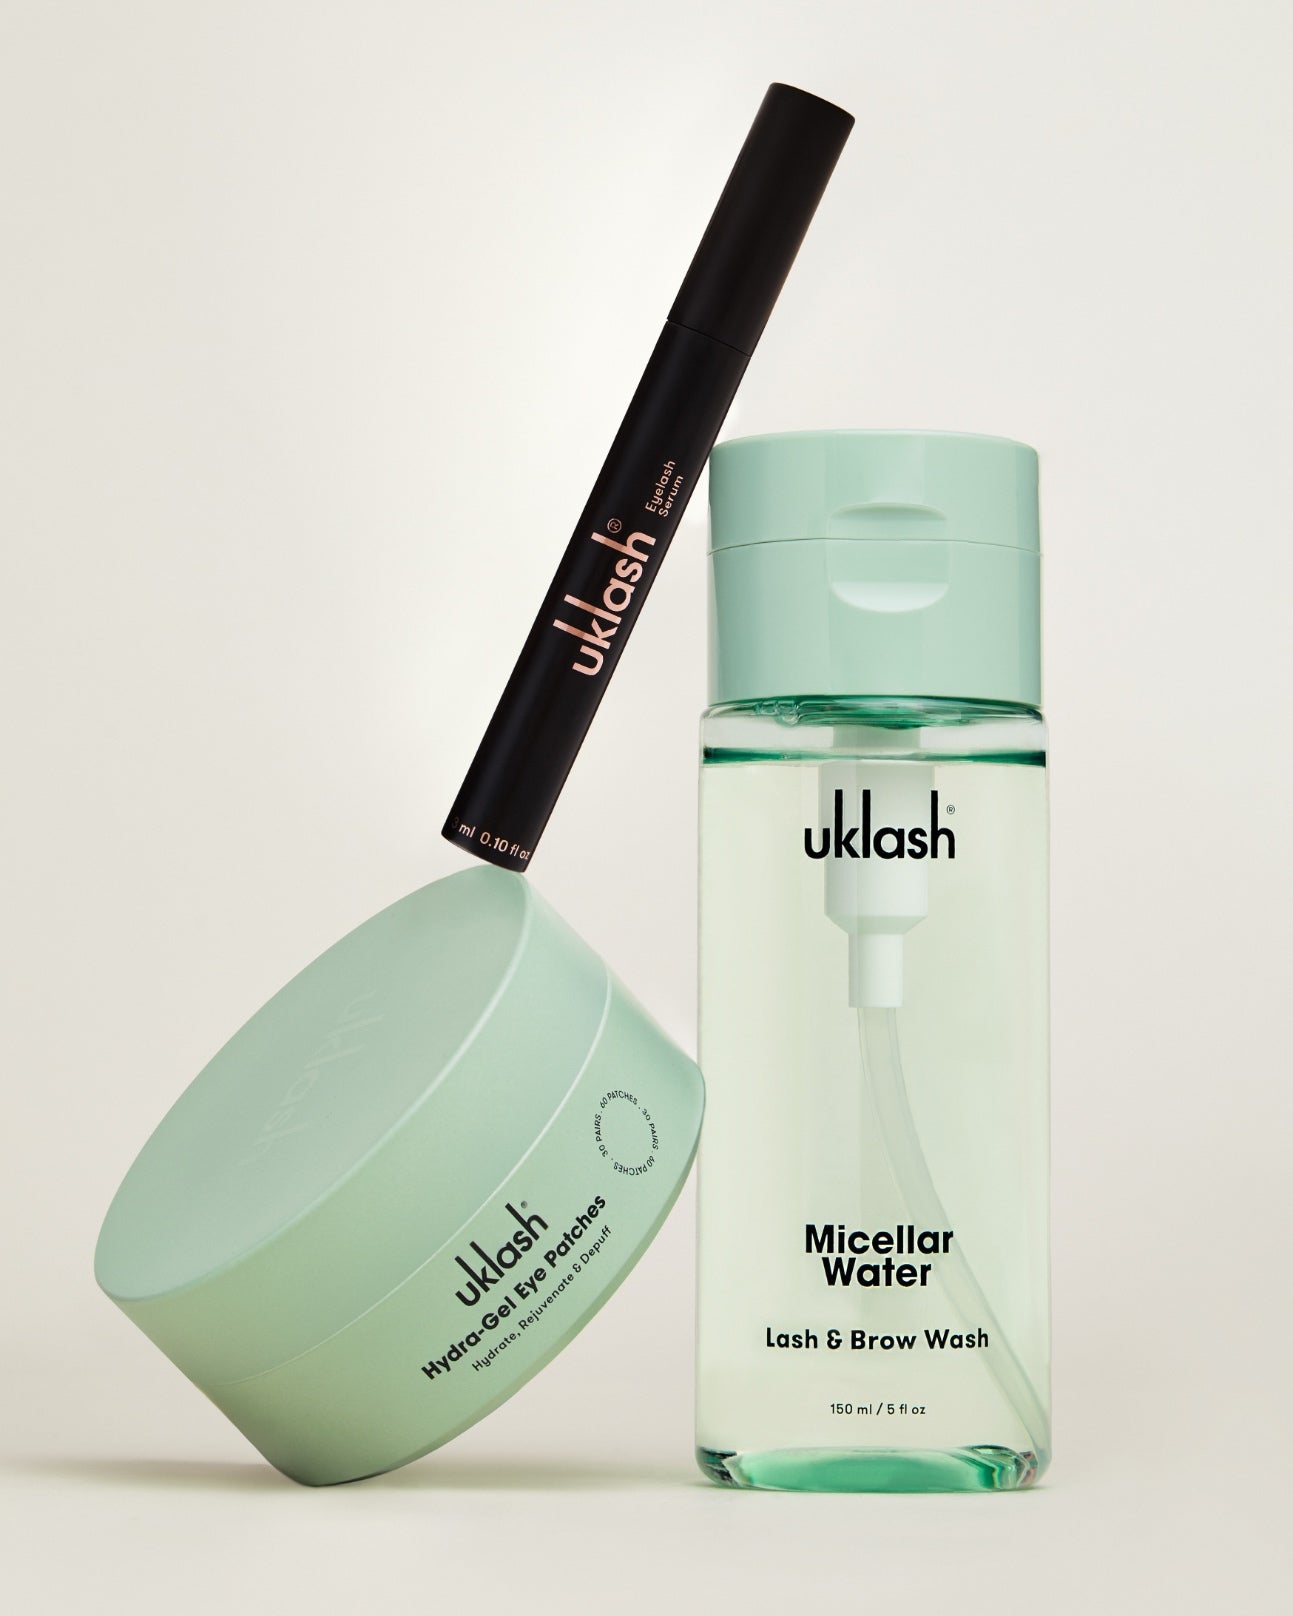 6 Black Friday Beauty Deals To Steal This Season - UKLASH